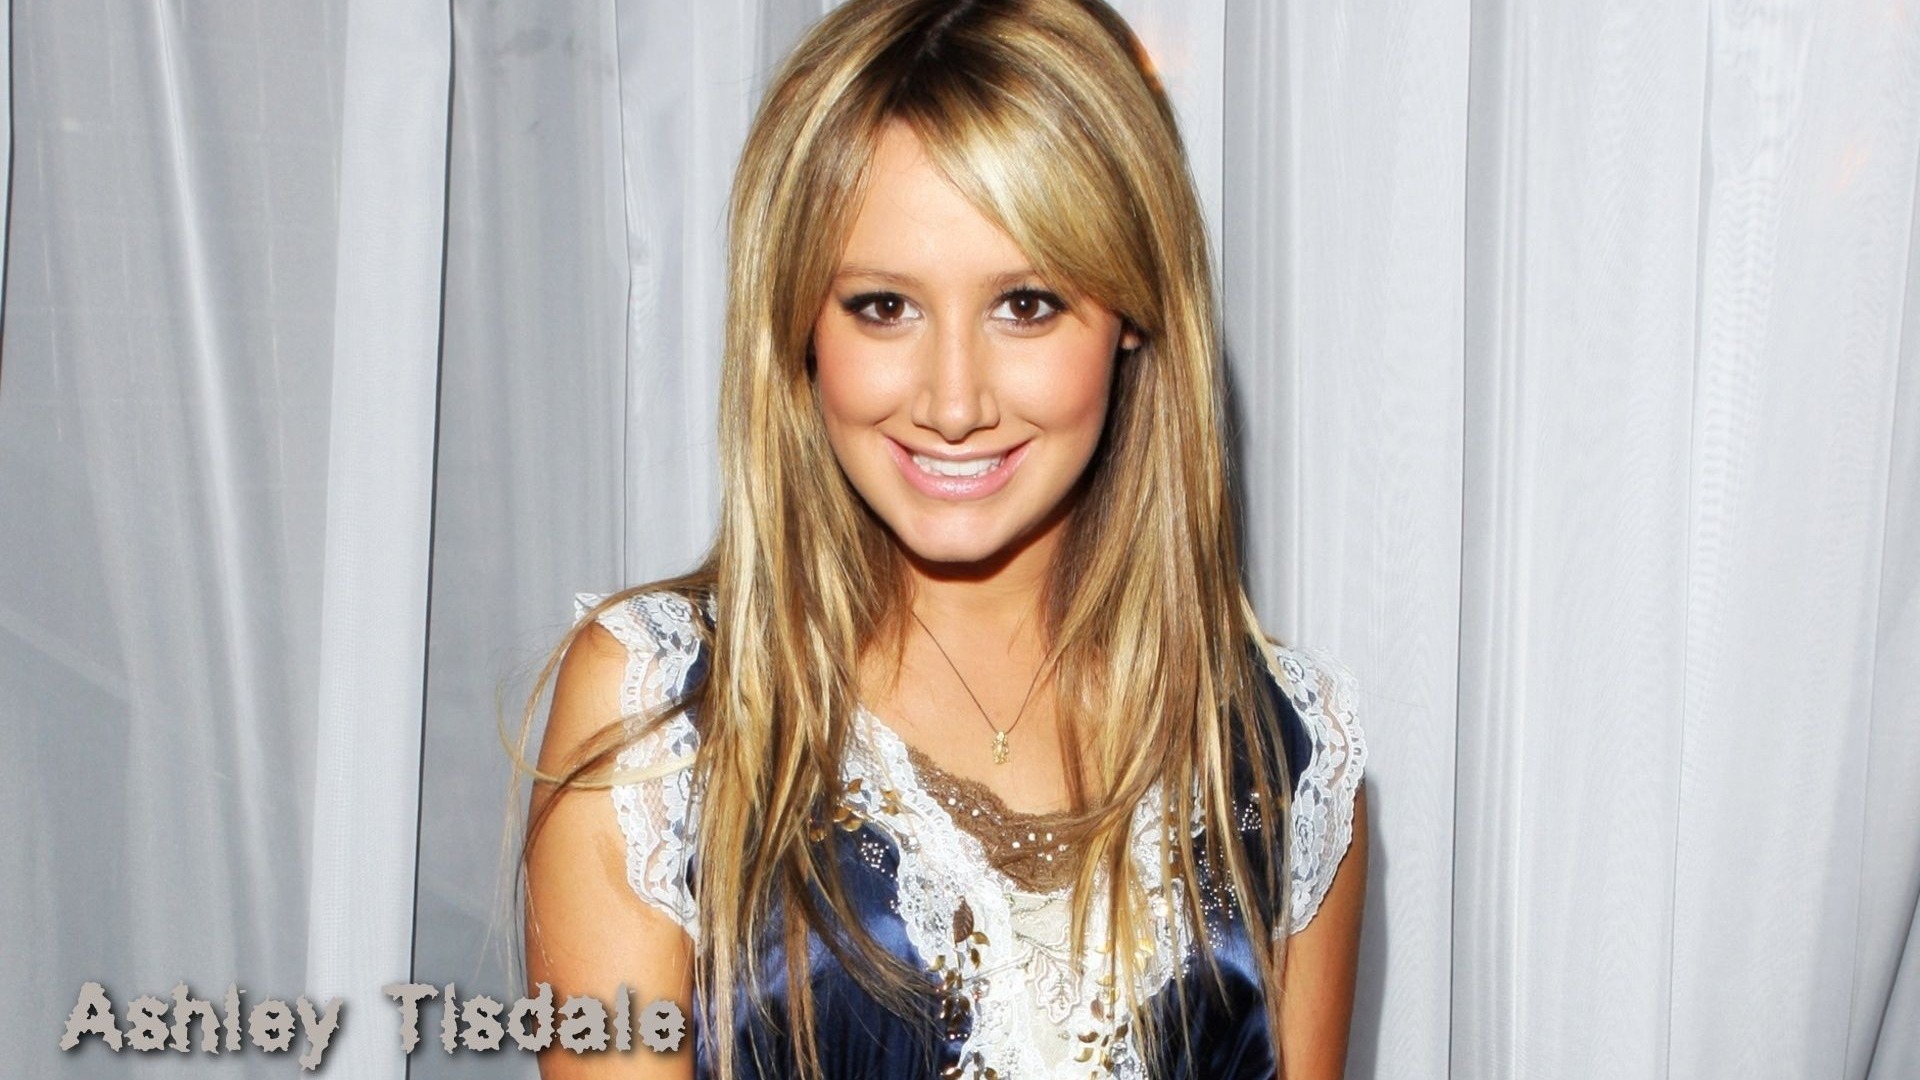 Ashley Tisdale #021 - 1920x1080 Wallpapers Pictures Photos Images